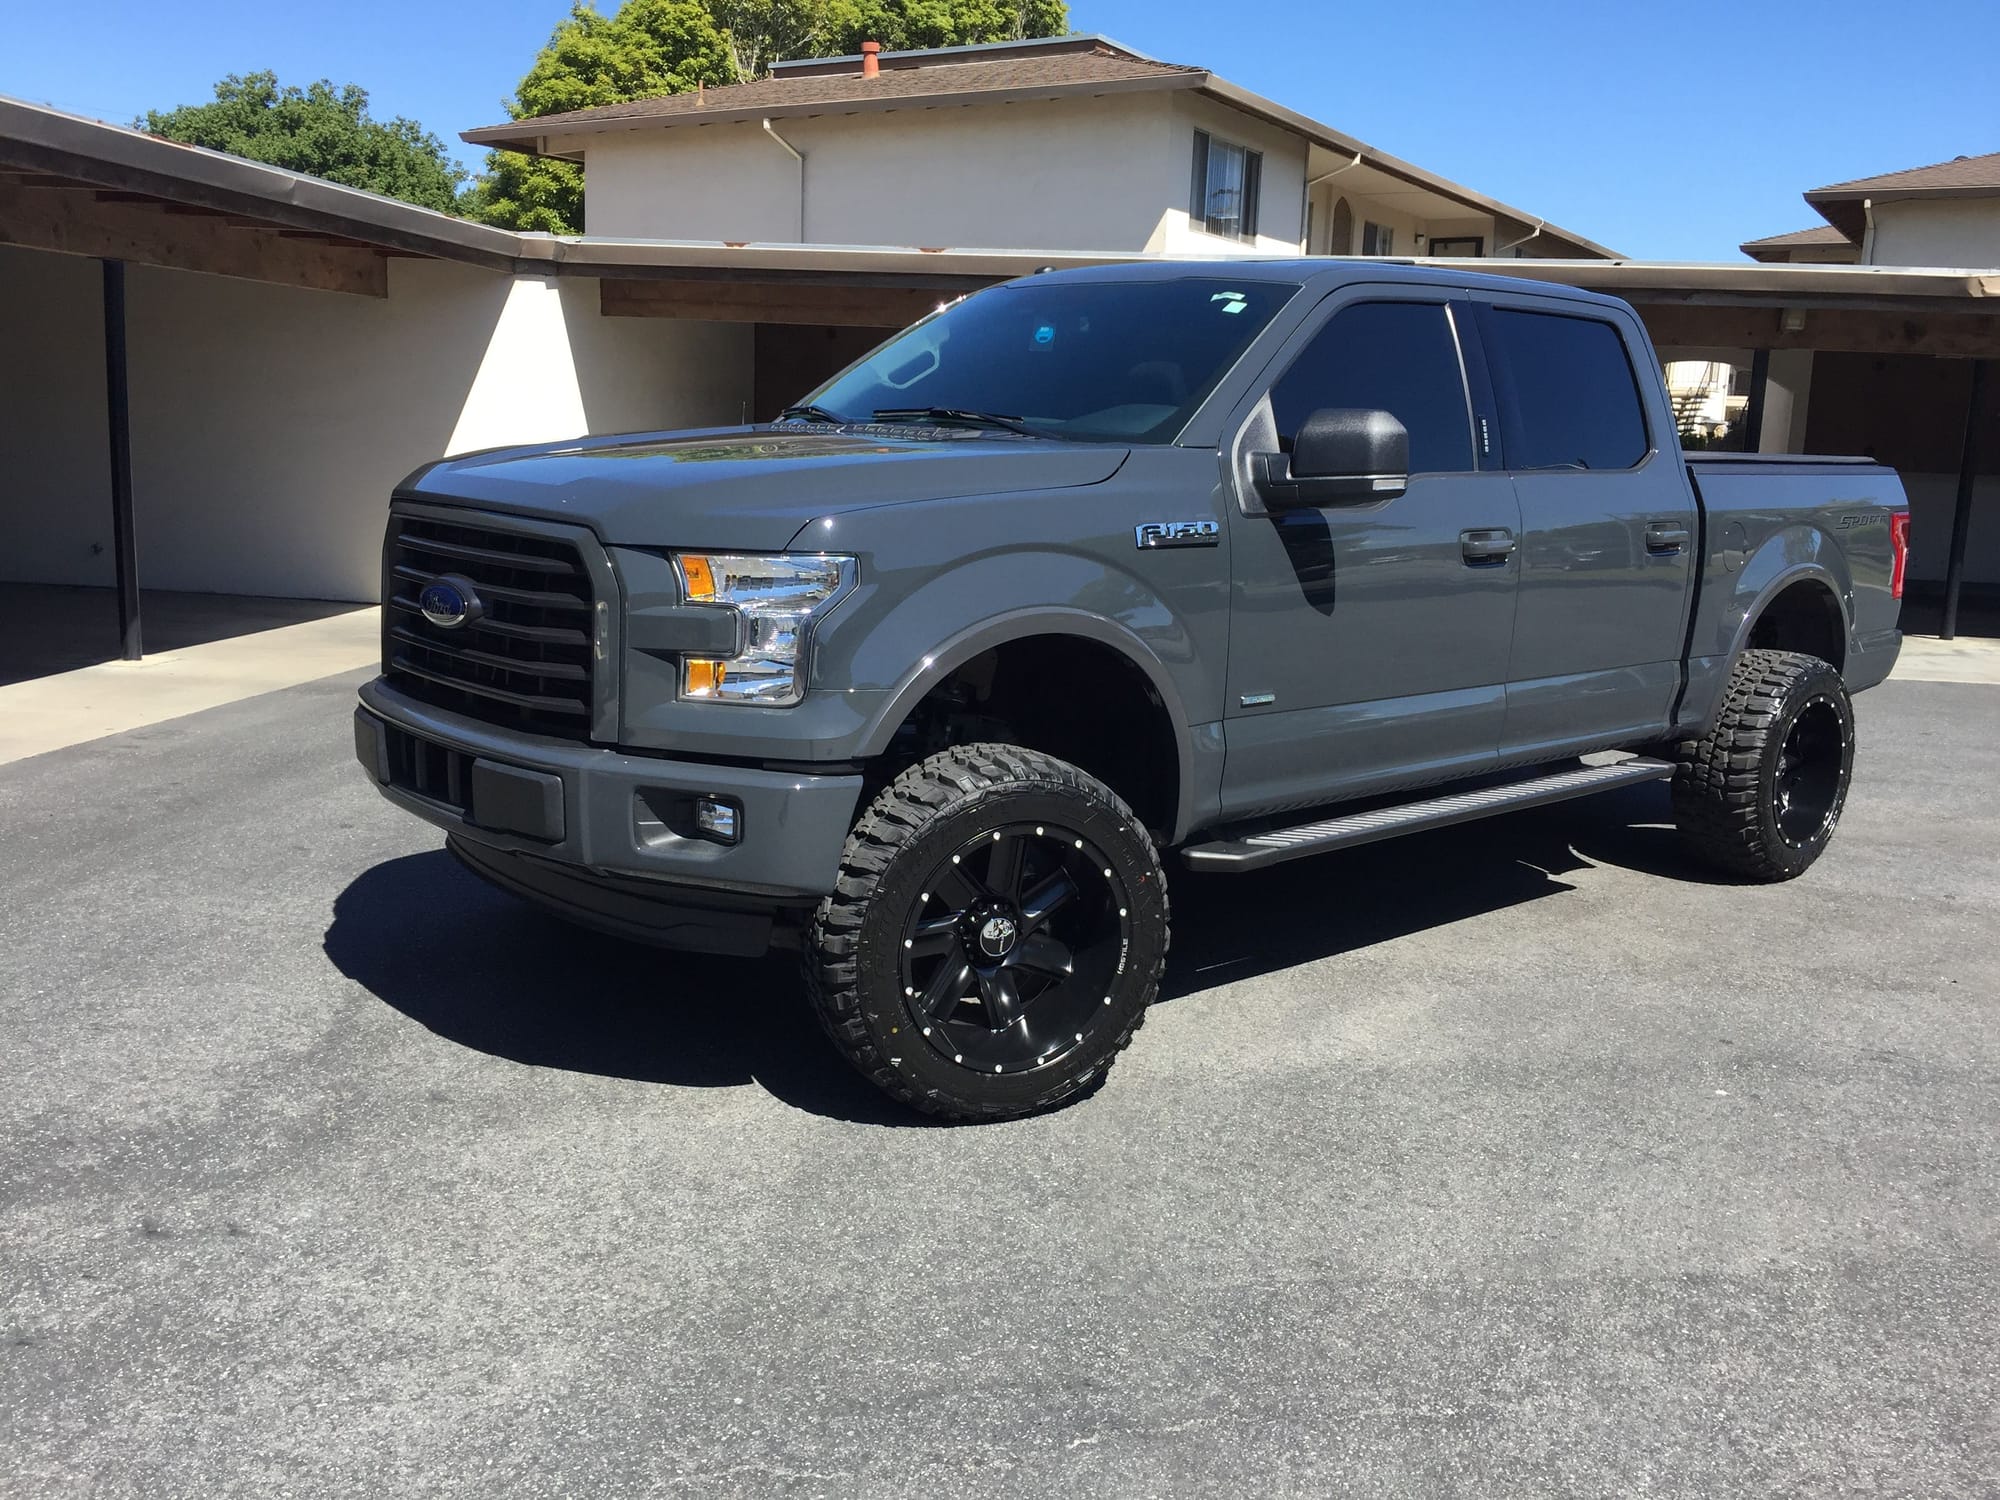 Lifted F150 Ecoboost Related Keywords & Suggestions - Lifted